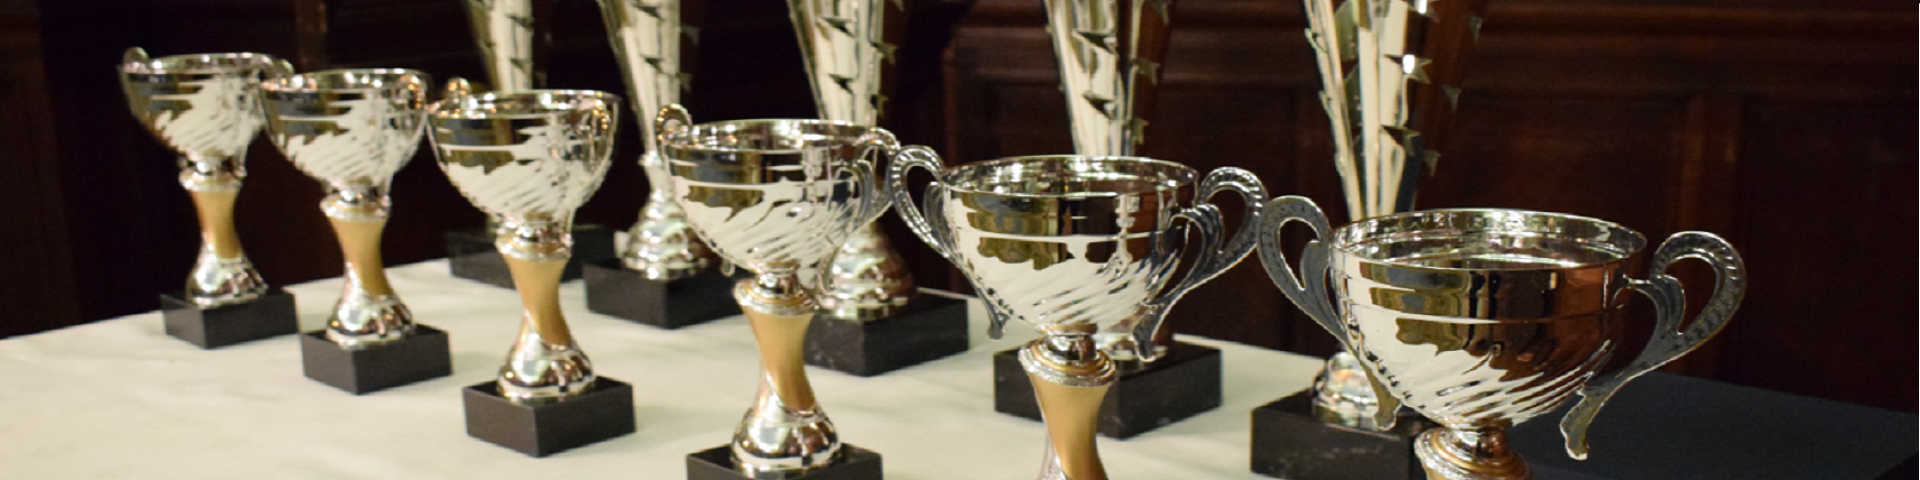 Sports awards trophies